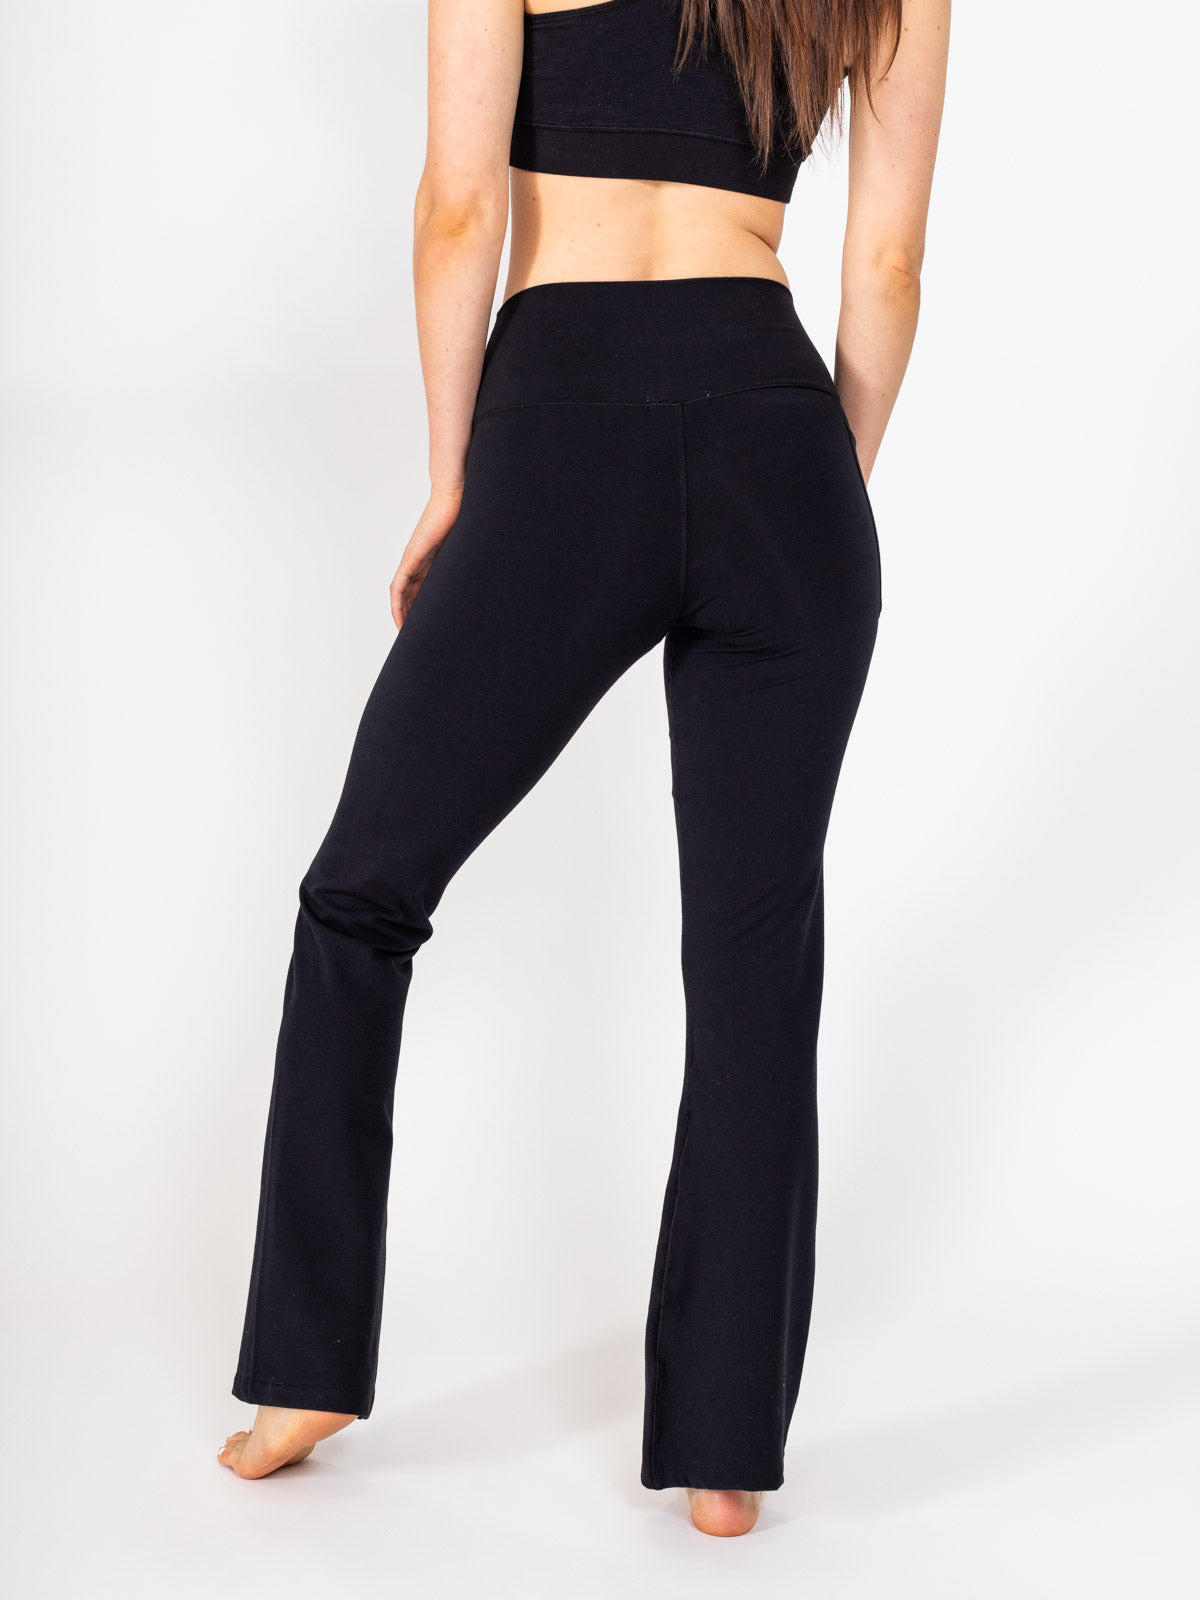 Heather Rib All Day Flare Pant